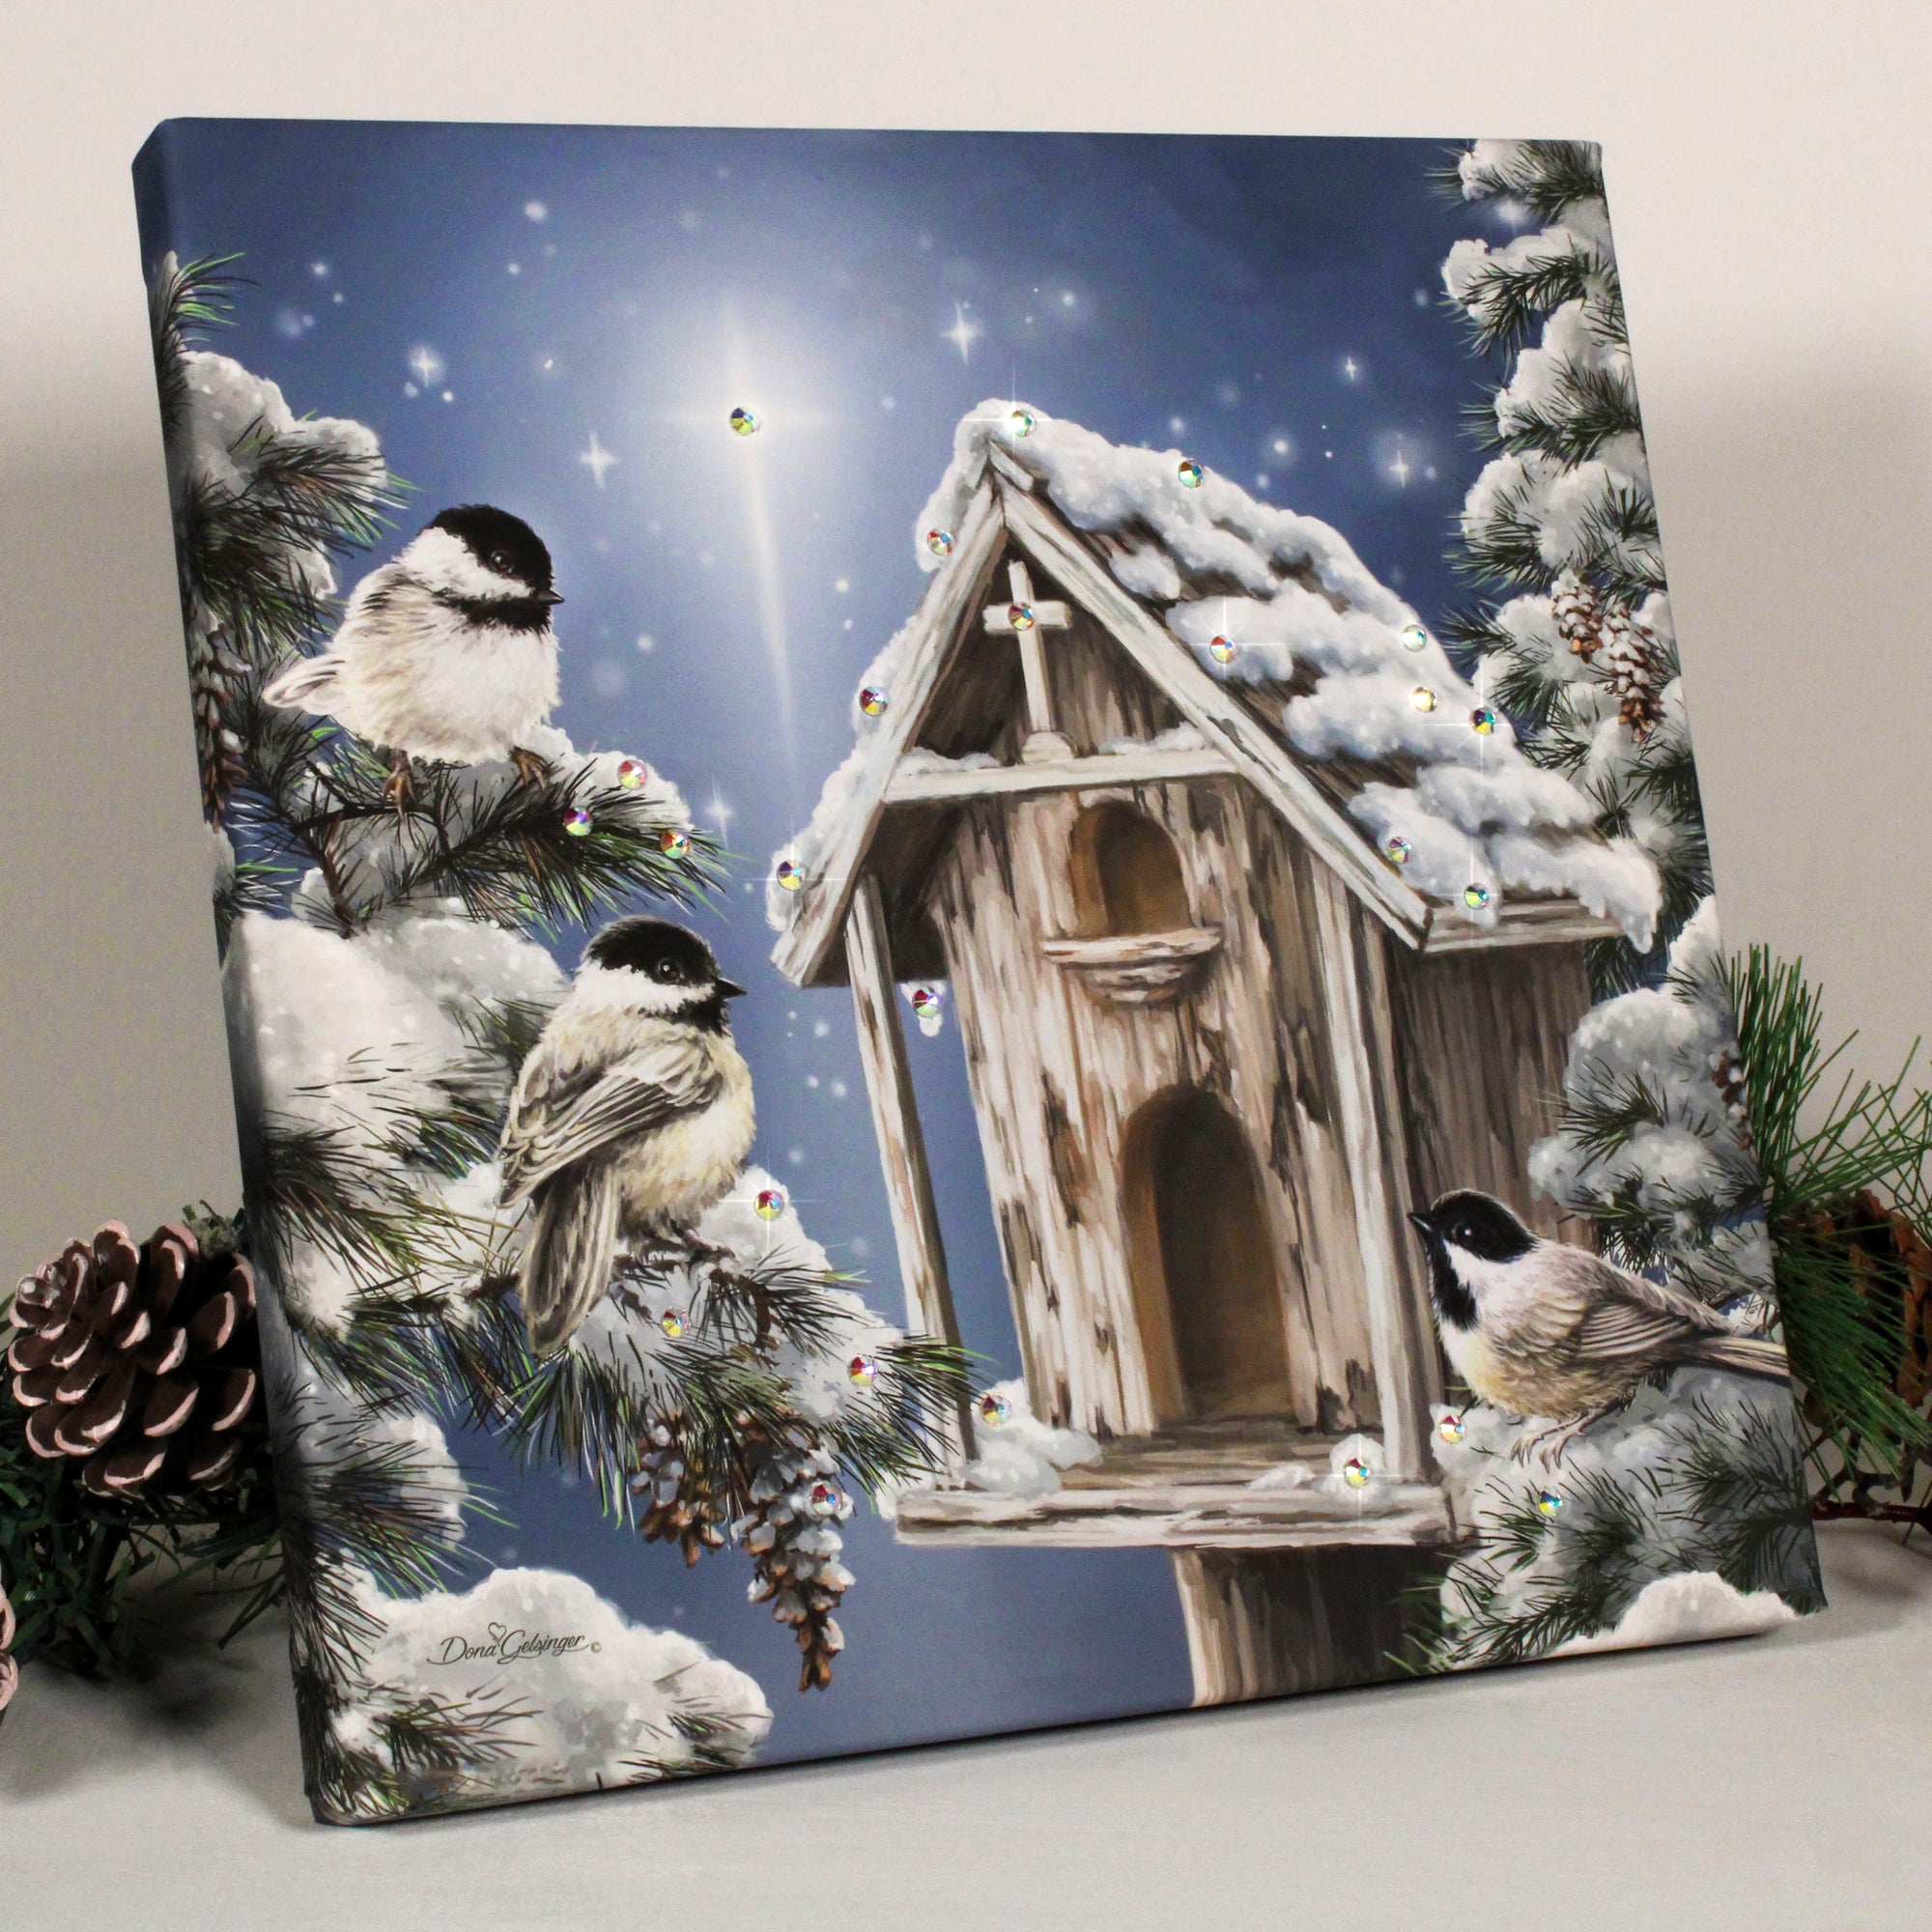 This stunning piece of art features a charming birdhouse nestled among towering pine trees, with a glittering cross at its peak, evoking a sense of spiritual harmony.  The scene is breathtakingly beautiful, with a blanket of snow covering the birdhouse and the pines. Three adorable birds sit perched among the branches, enjoying the peaceful surroundings. And to top it all off, a bright star twinkles in the sky.